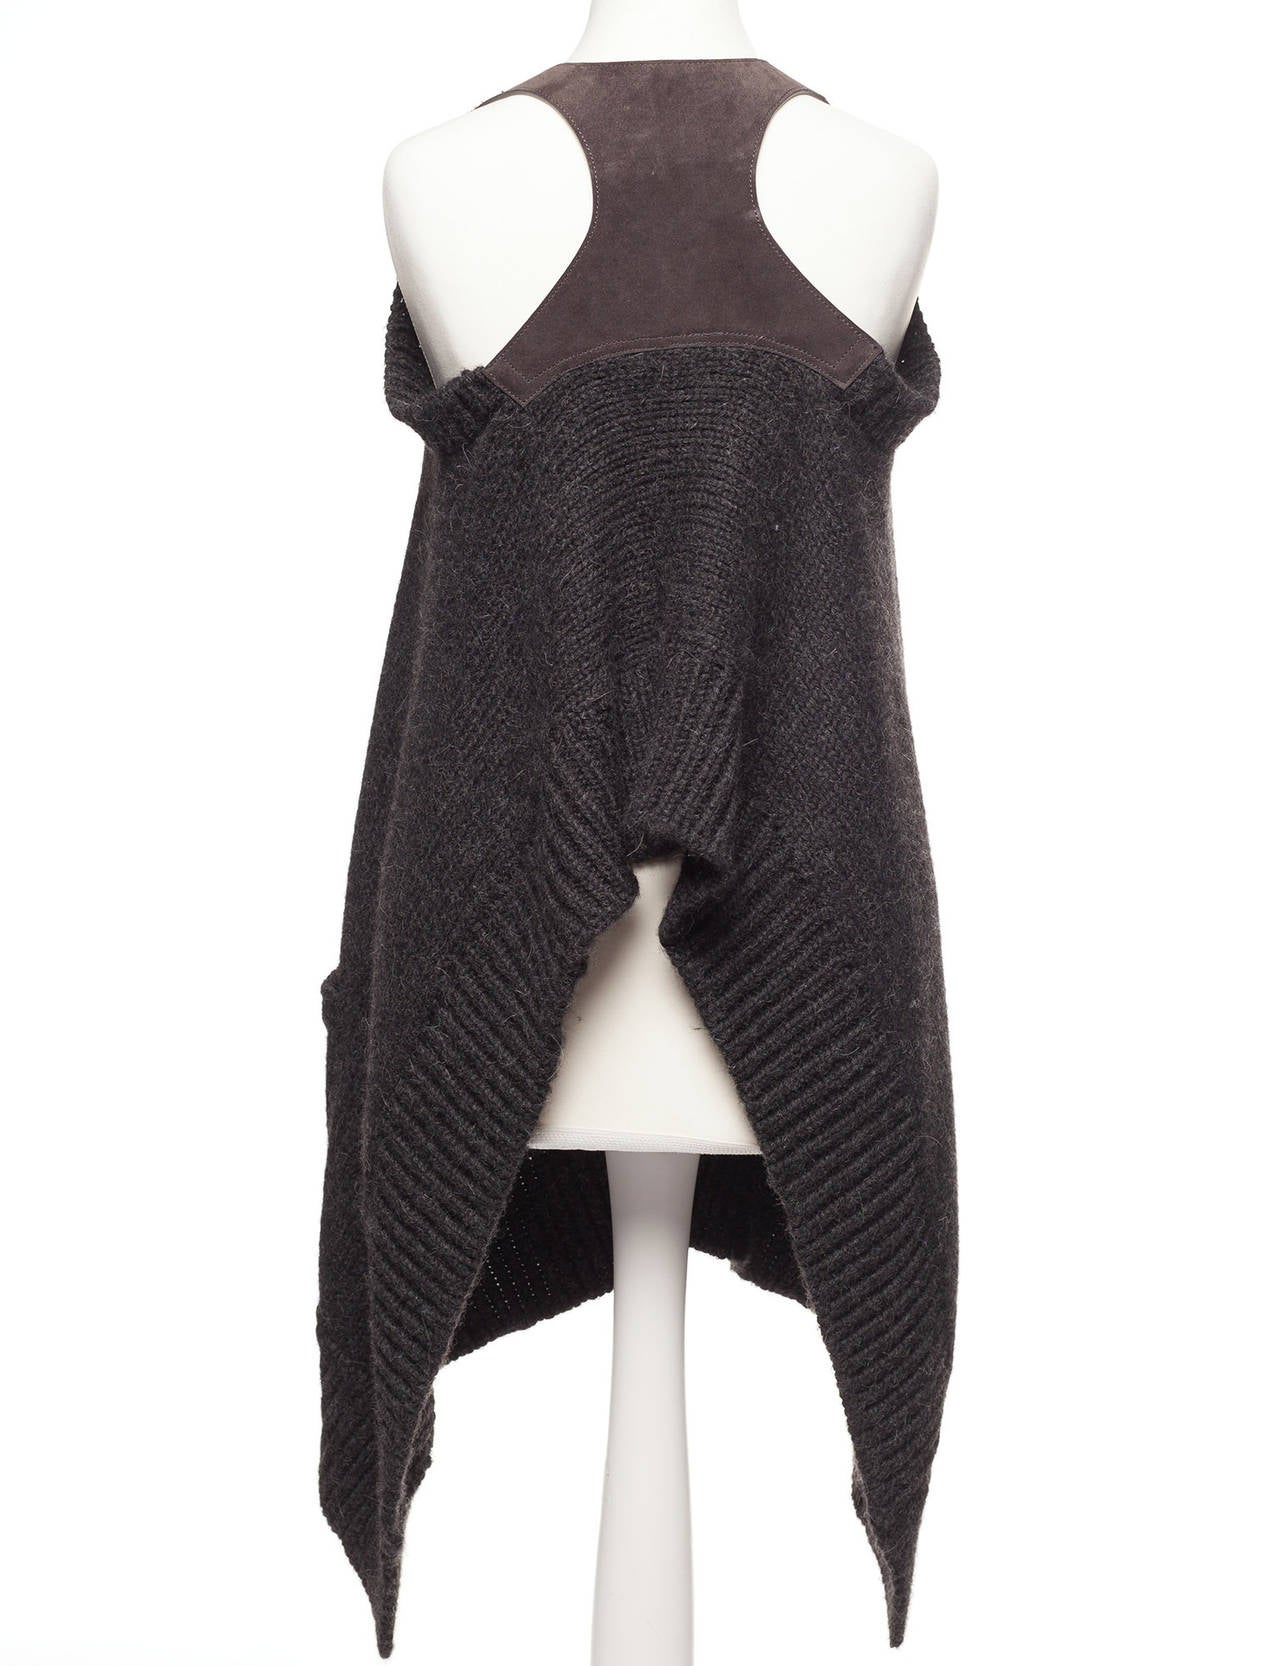 Women's Kaufmanfranco alpaca knitted vest with leather back detail, Sz. S